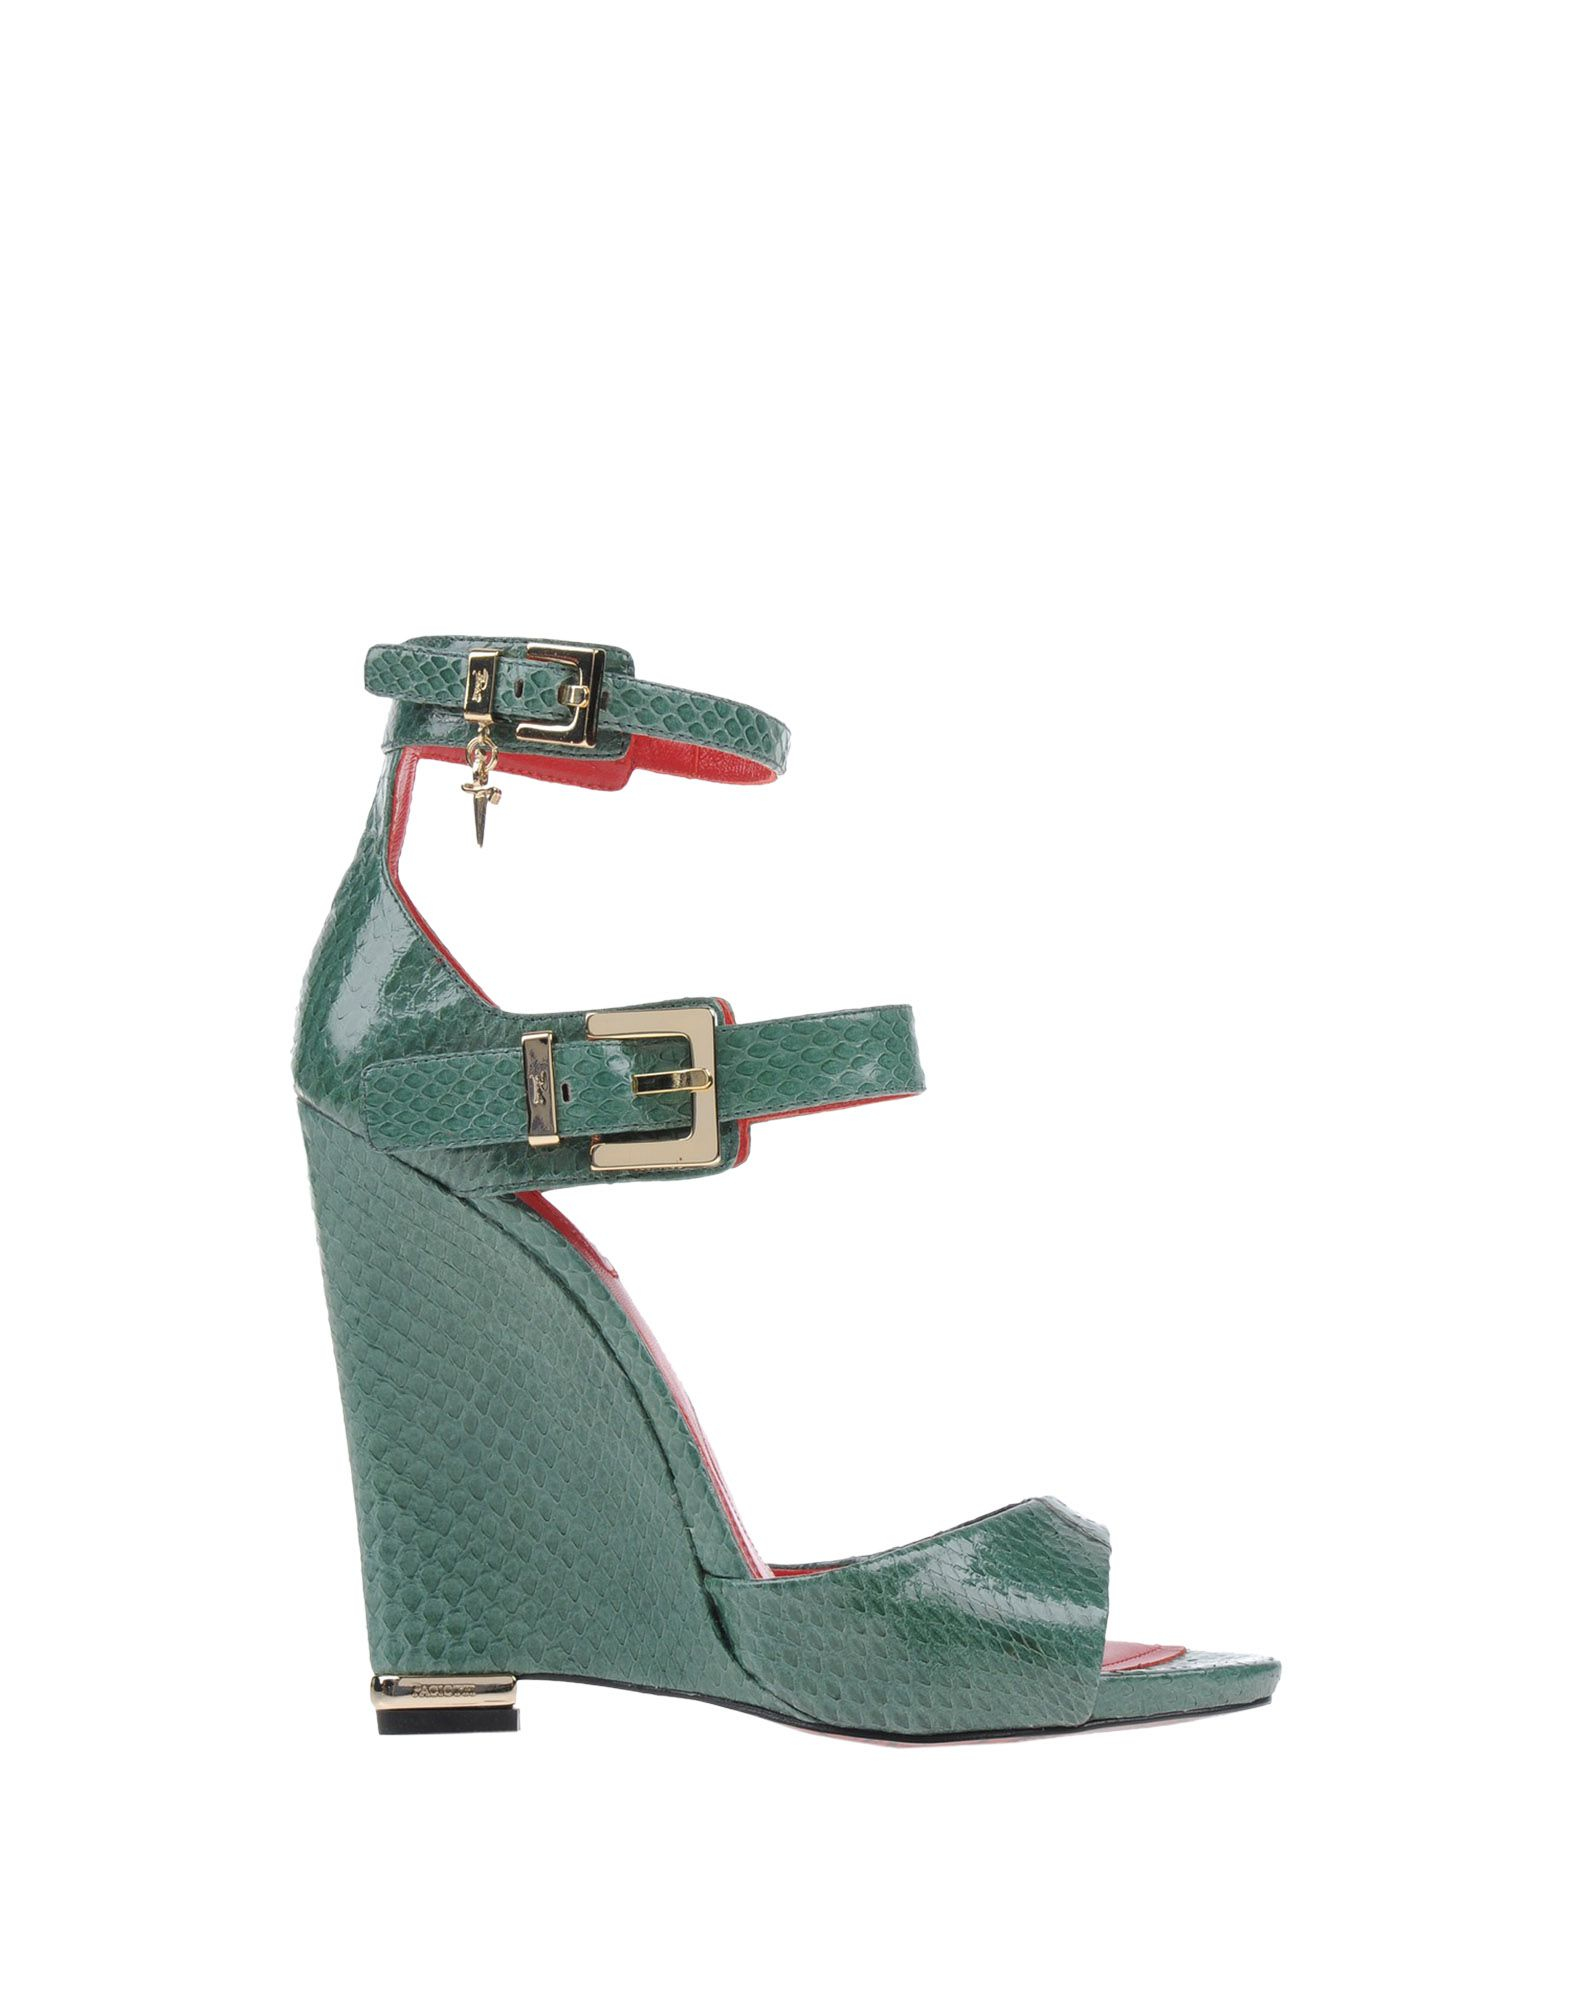 Cesare Paciotti Leather Sandals in Green - Lyst